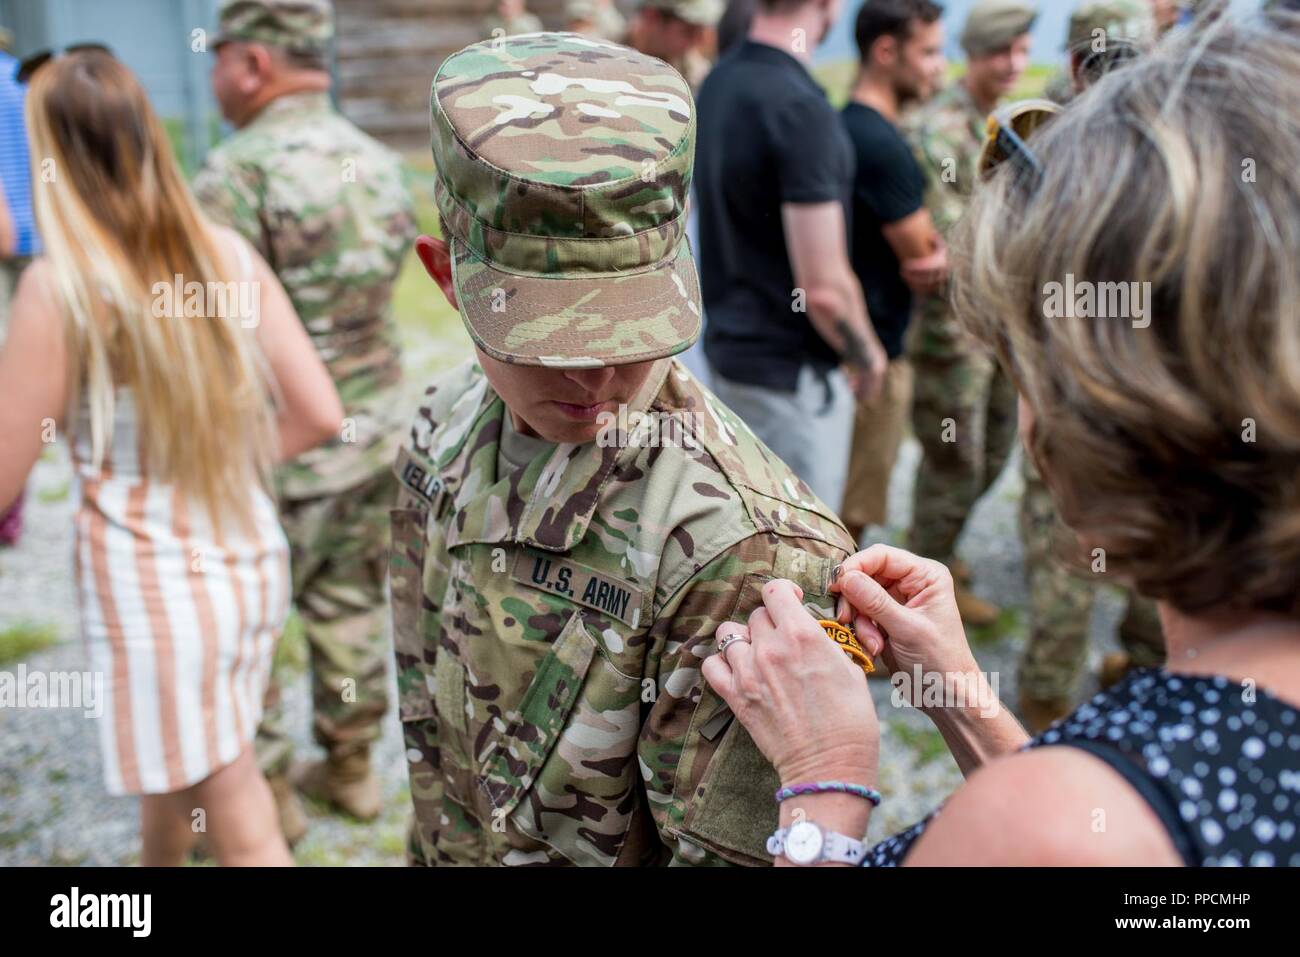 180831-A-YH902-002 (Aug. 31, 2018) Staff Sgt. Amanda F. Kelley, assigned to the 1st Armored Division’s combat aviation brigade at Fort Bliss, Texas, gets her Ranger tab pinned on by a family member during her Ranger School graduation at Fort Benning, Georgia, Aug. 31, 2018. Kelley is the first enlisted woman to earn the Ranger tab. Stock Photo